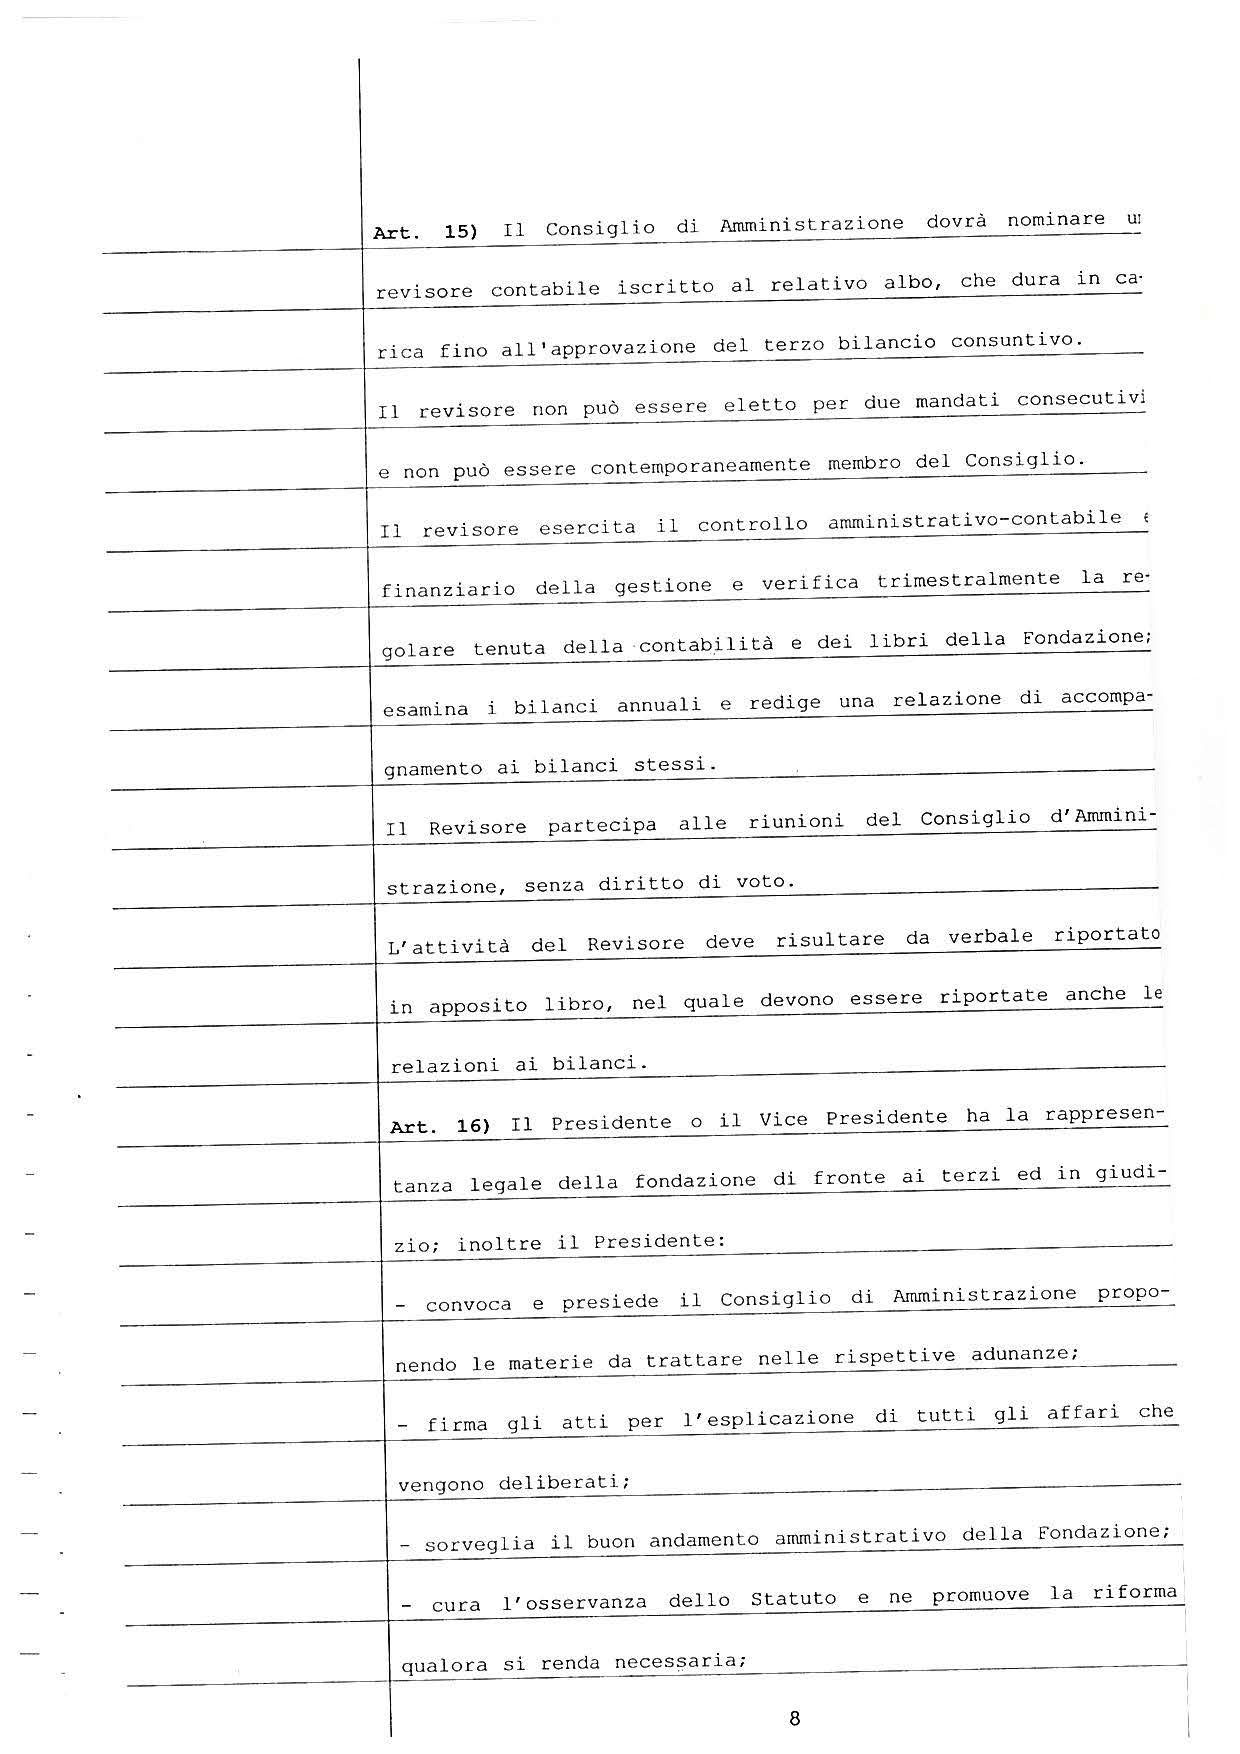 Scanned Document